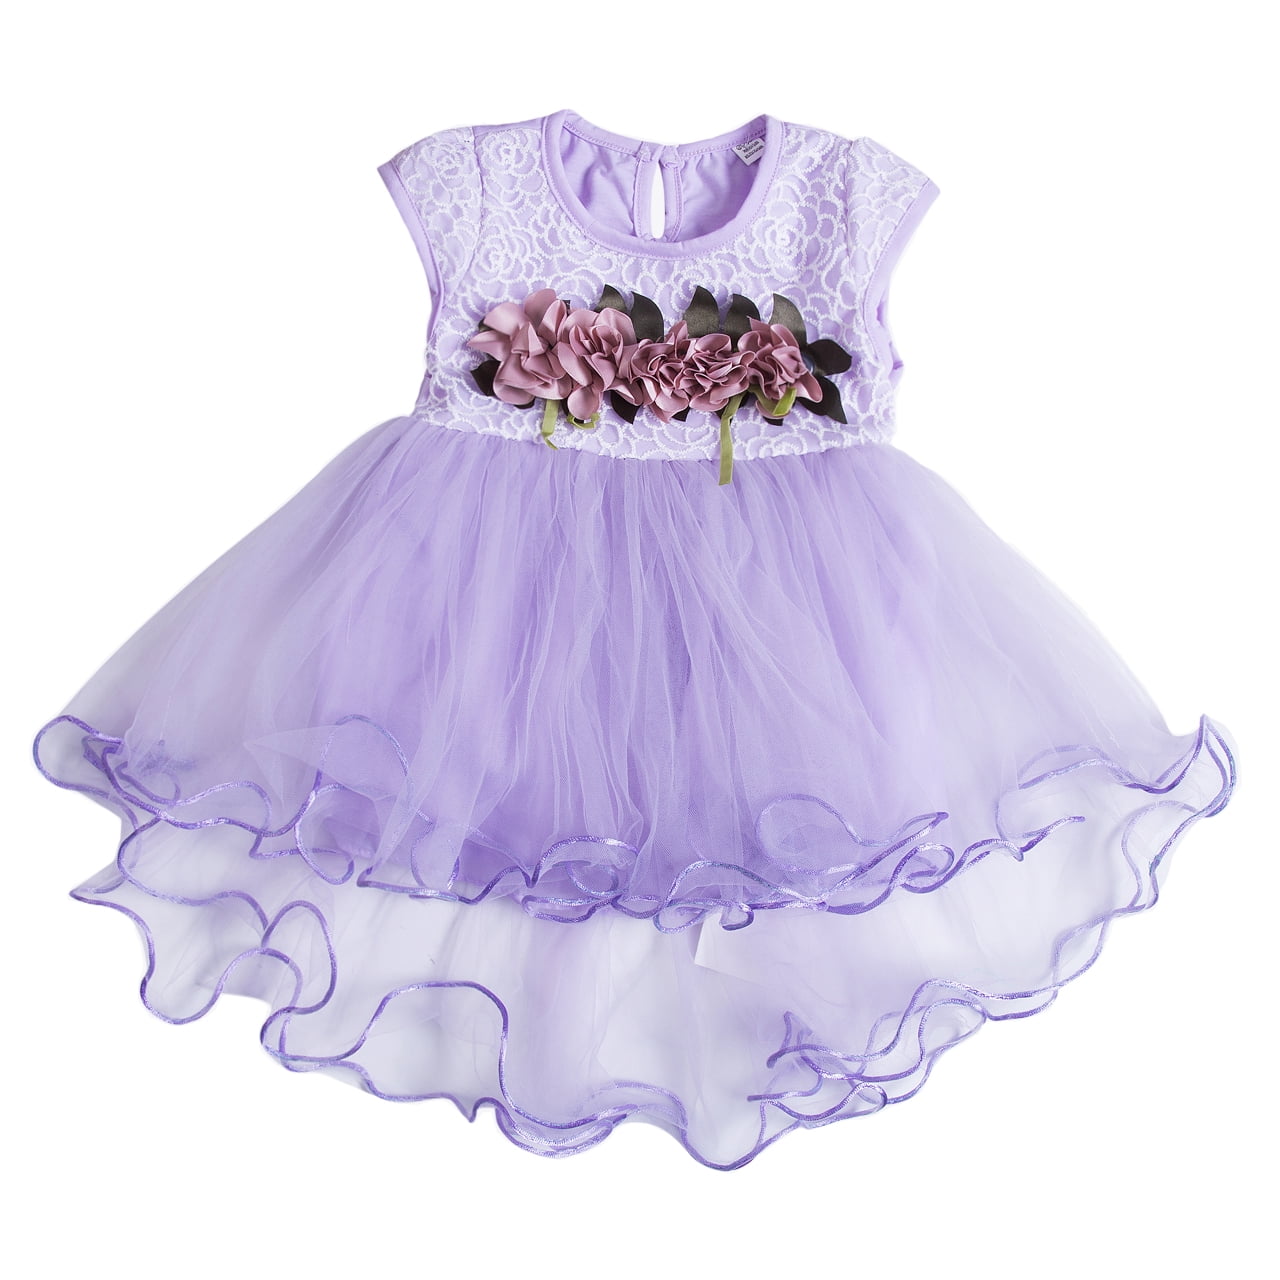 Flower Girl Party Bridesmaid Christening Dress Lilac Pink White 0 3 6 9 12 18 M 